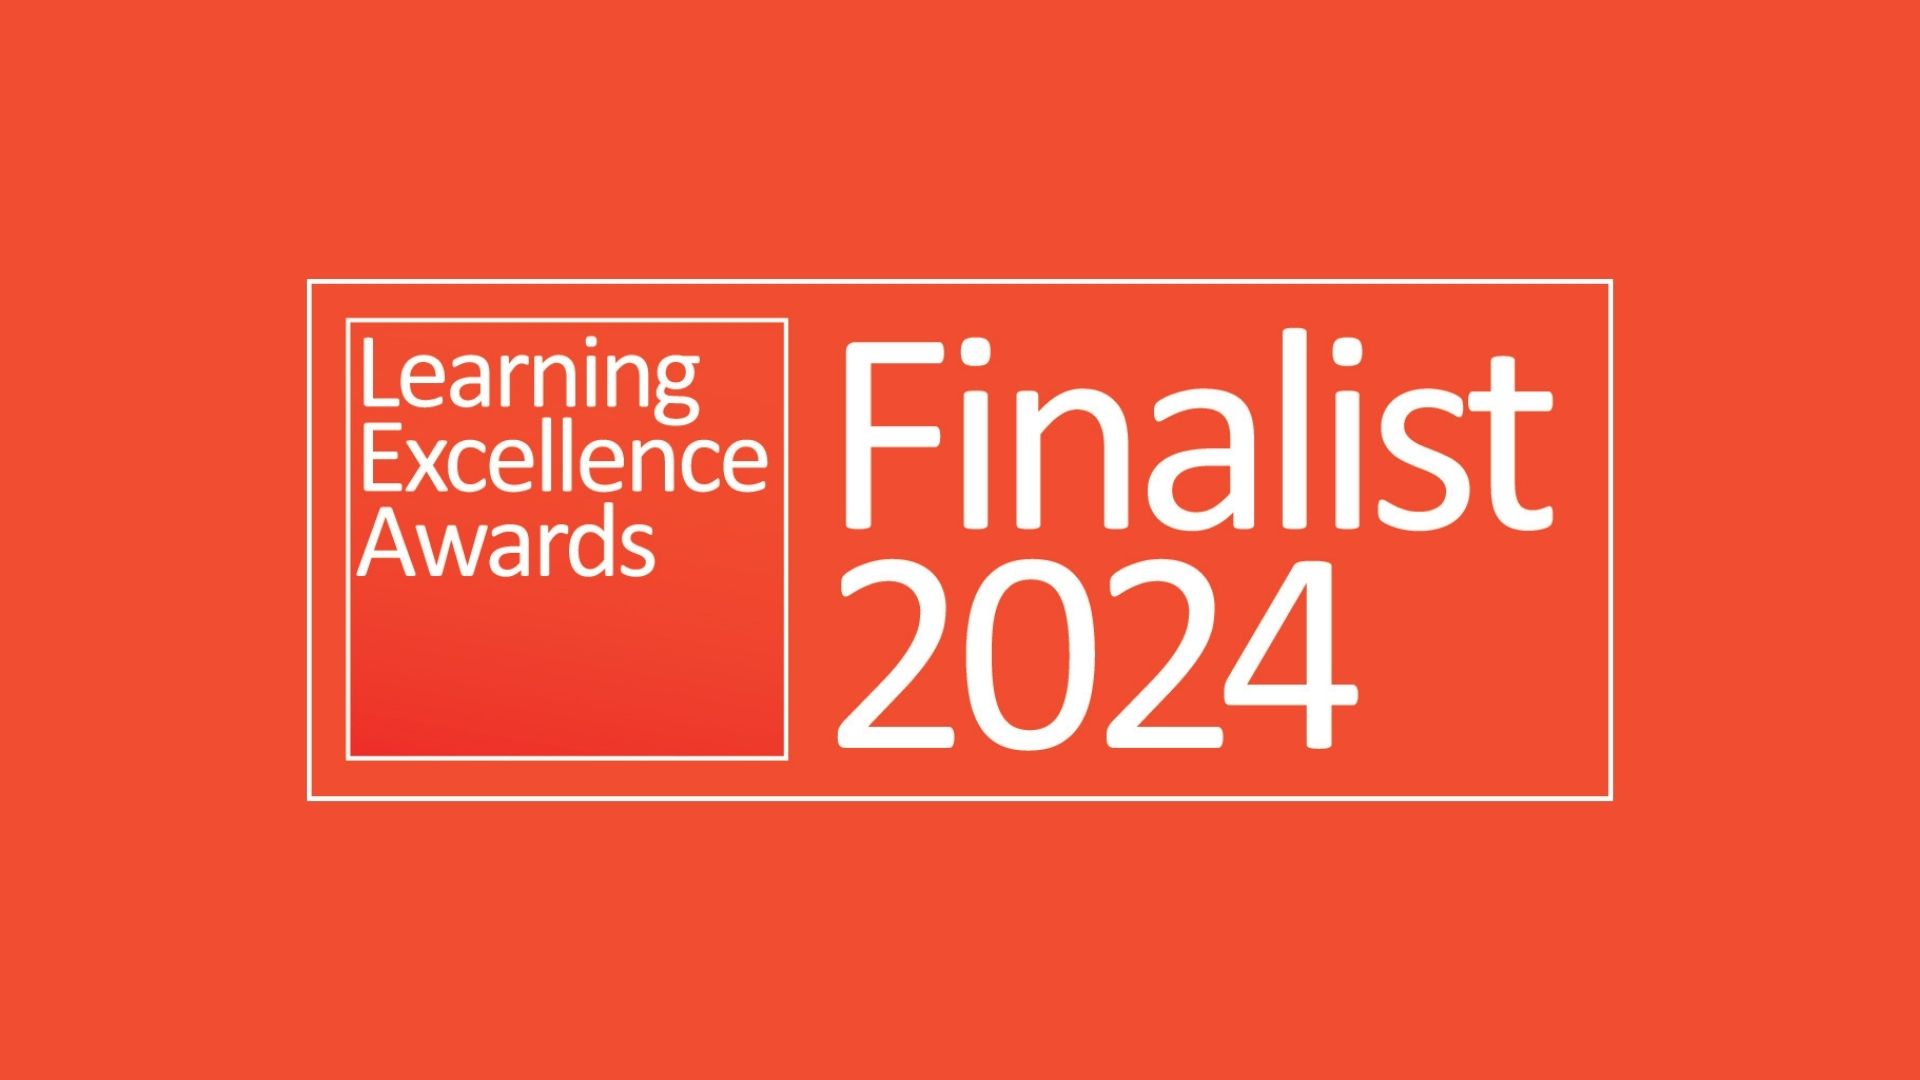 Learning Excellence Award Finalist for 2024